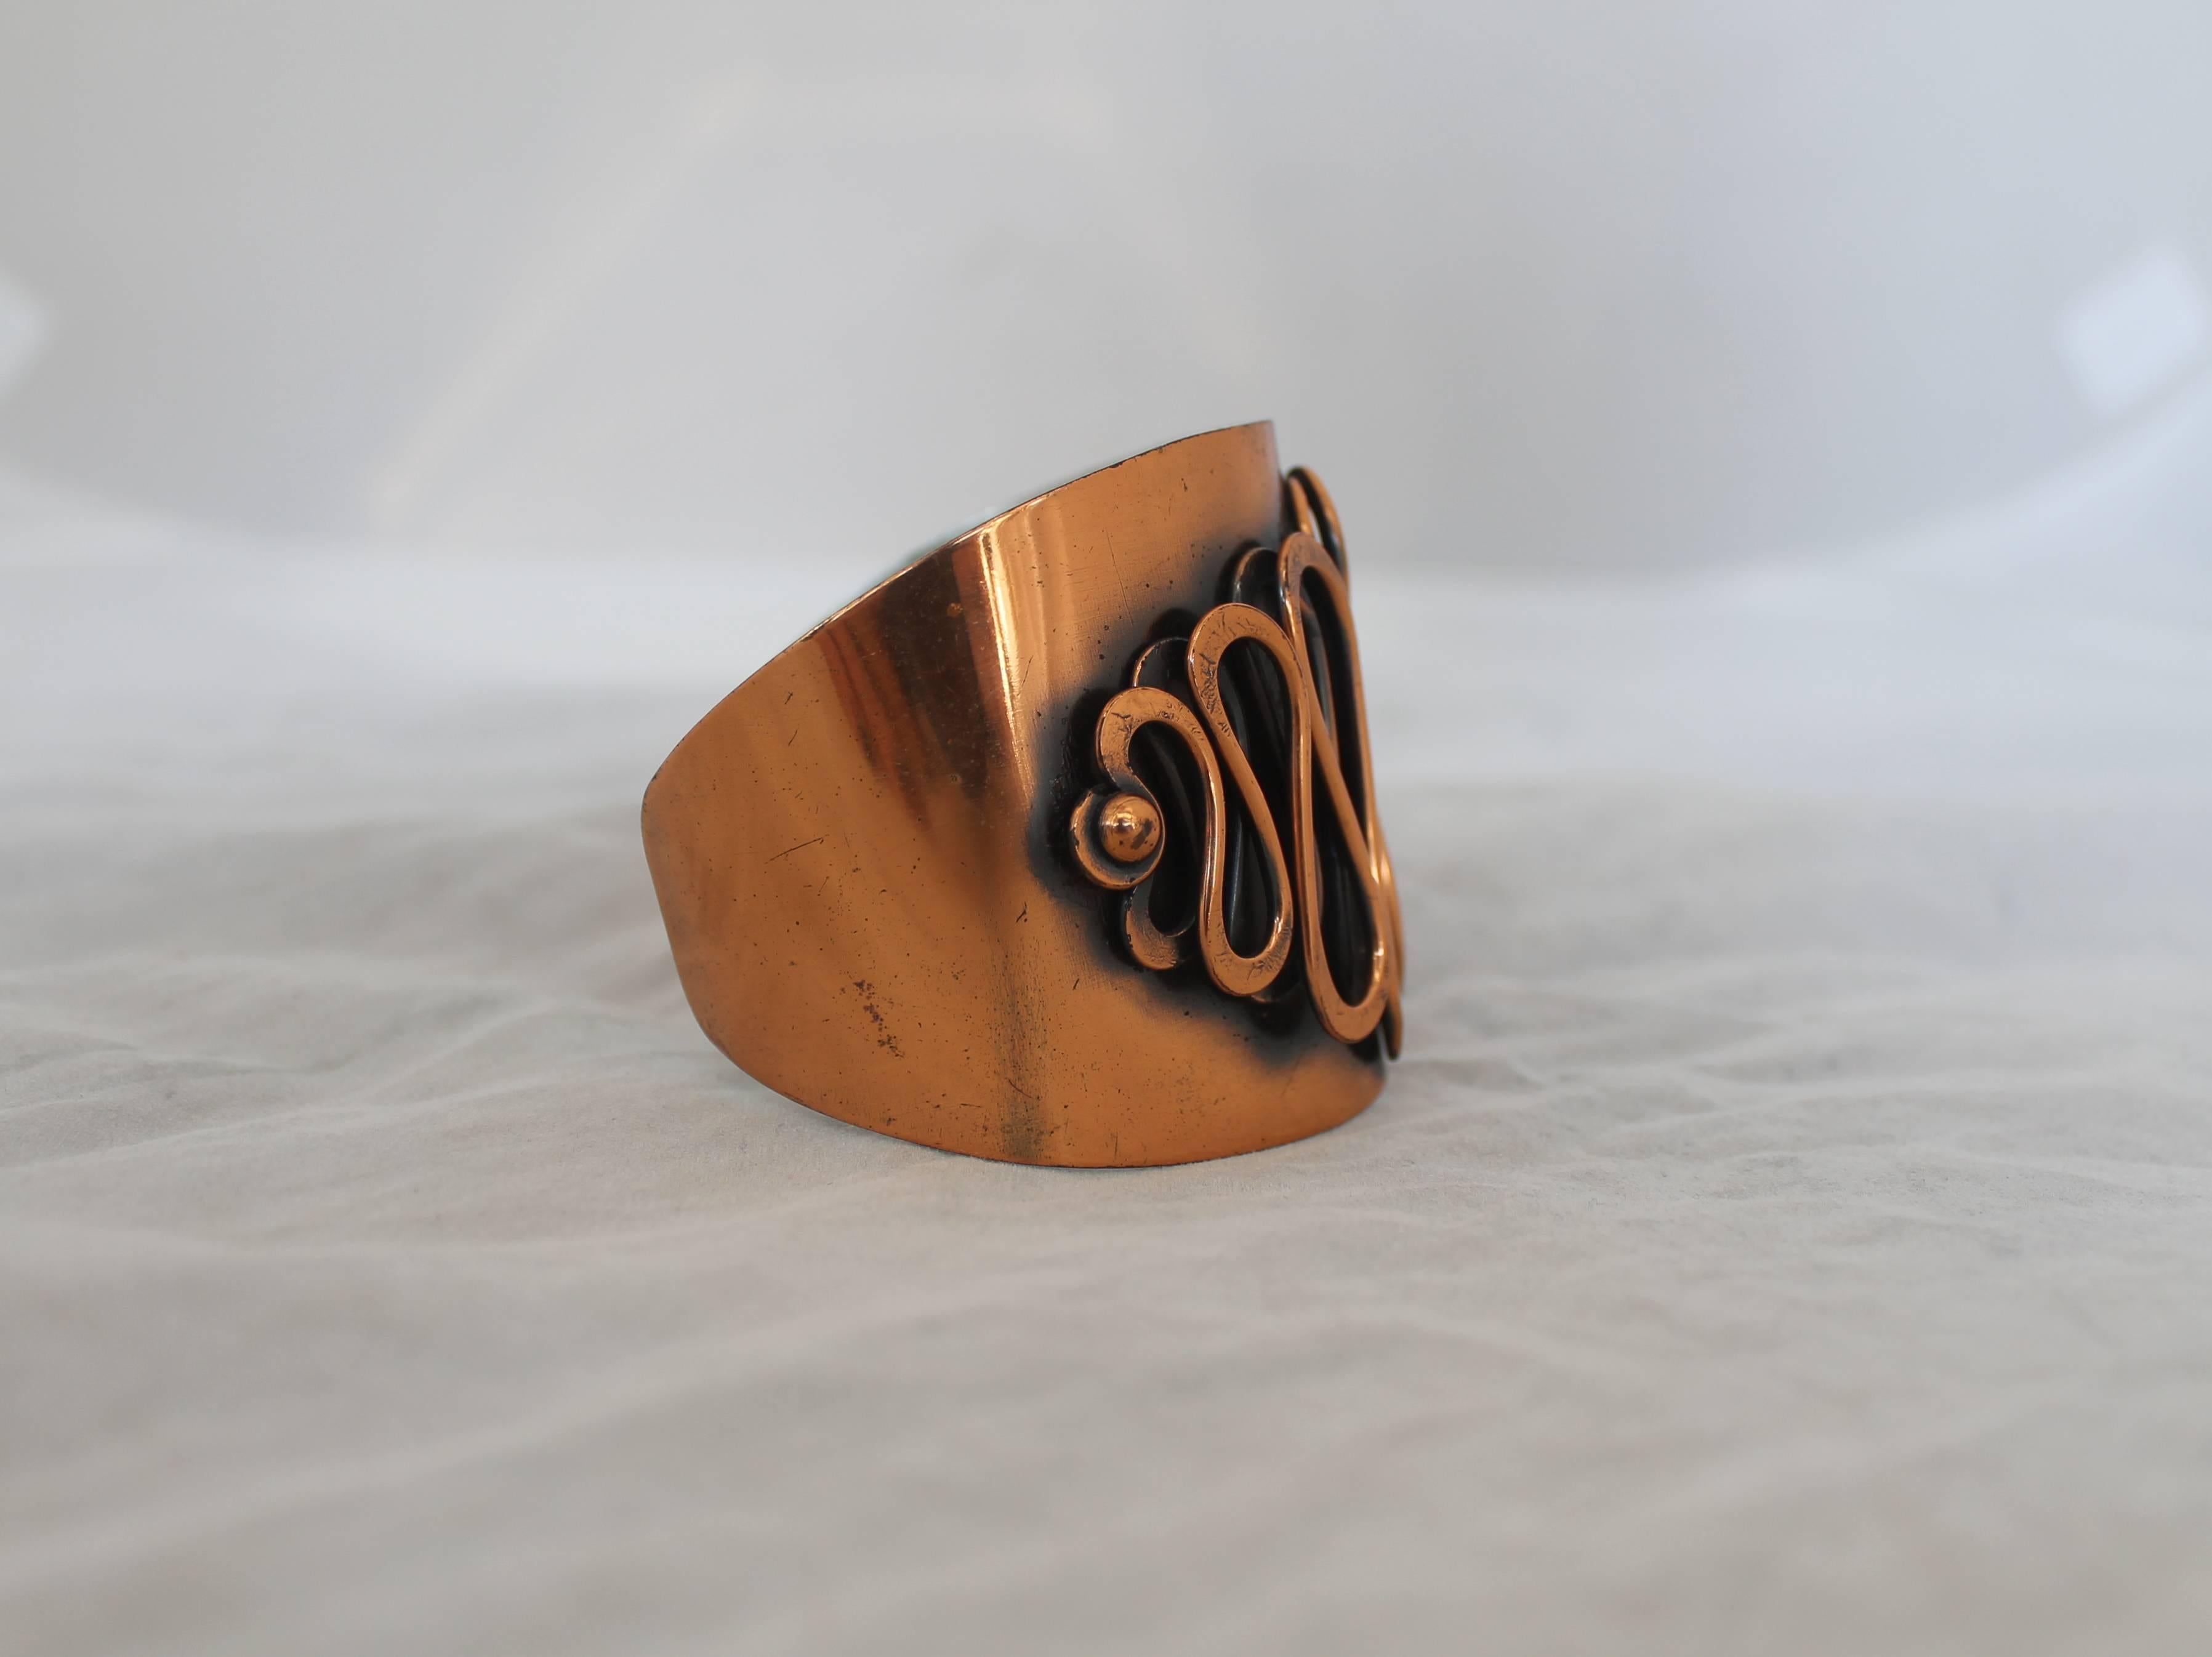 Rebajes Vintage Copper Rhythm Linear Cuff Bracelet - 1950's.  This unique vintage bracelet is in very good vintage condition with only some wear consistent with its age.  It features a double 